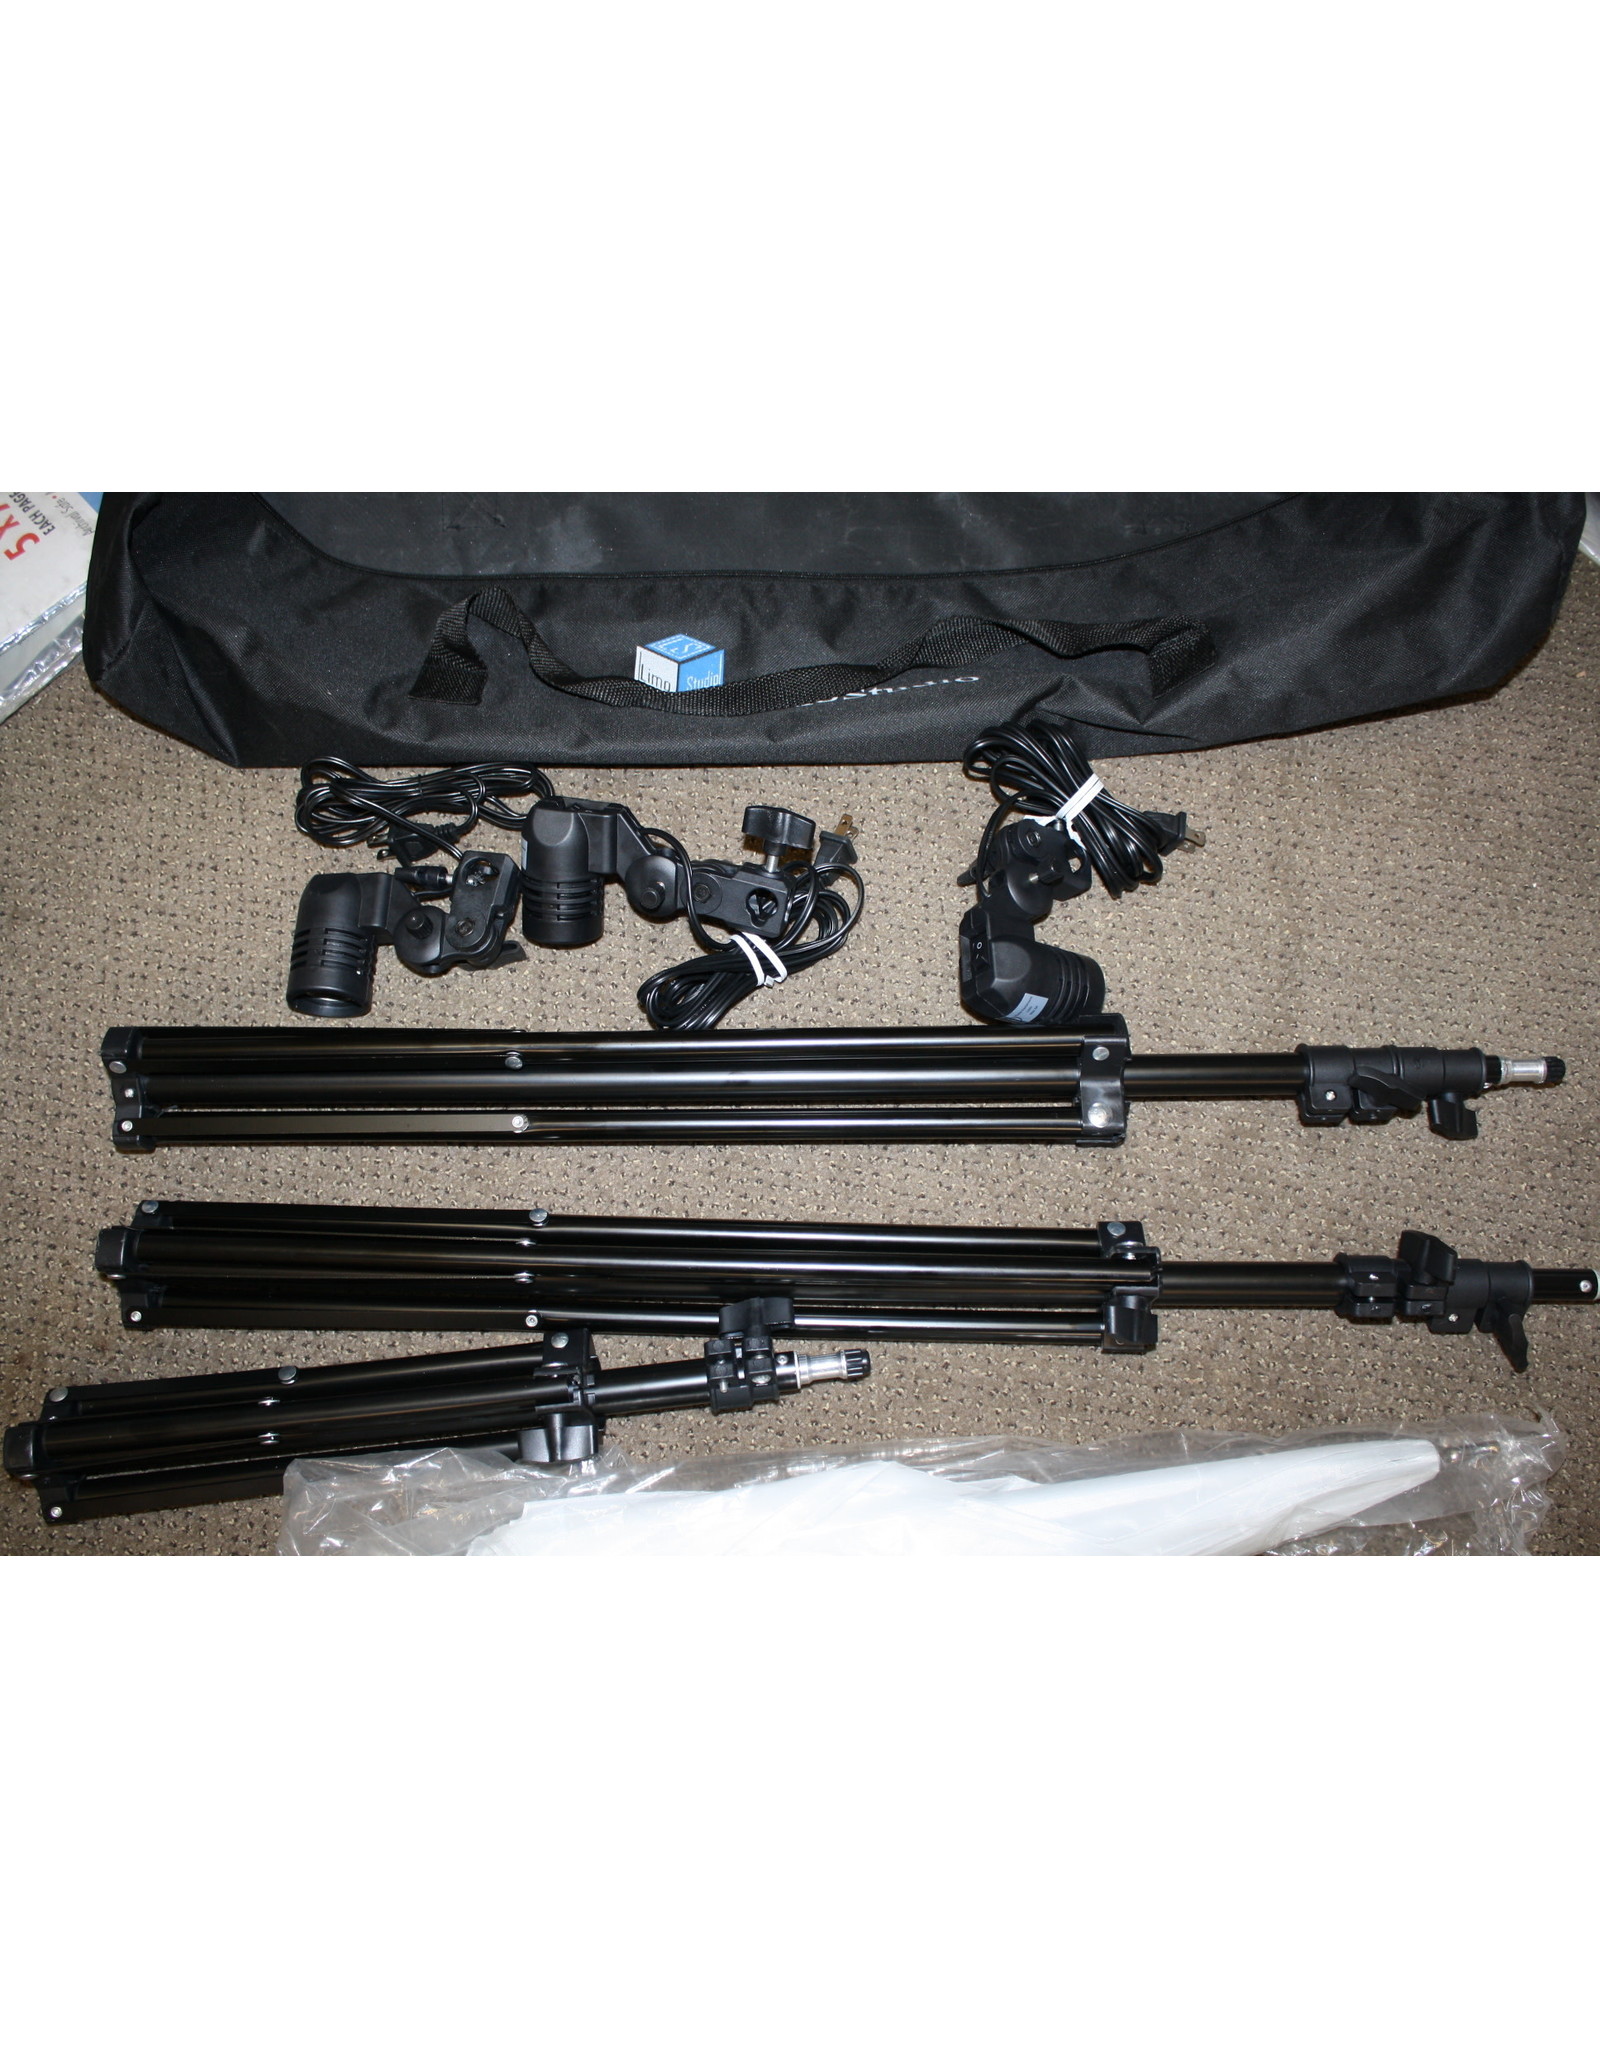 LimoStudio LimoStudio three light outfit with 2 umbrellas and carry case (OPEN BOX)